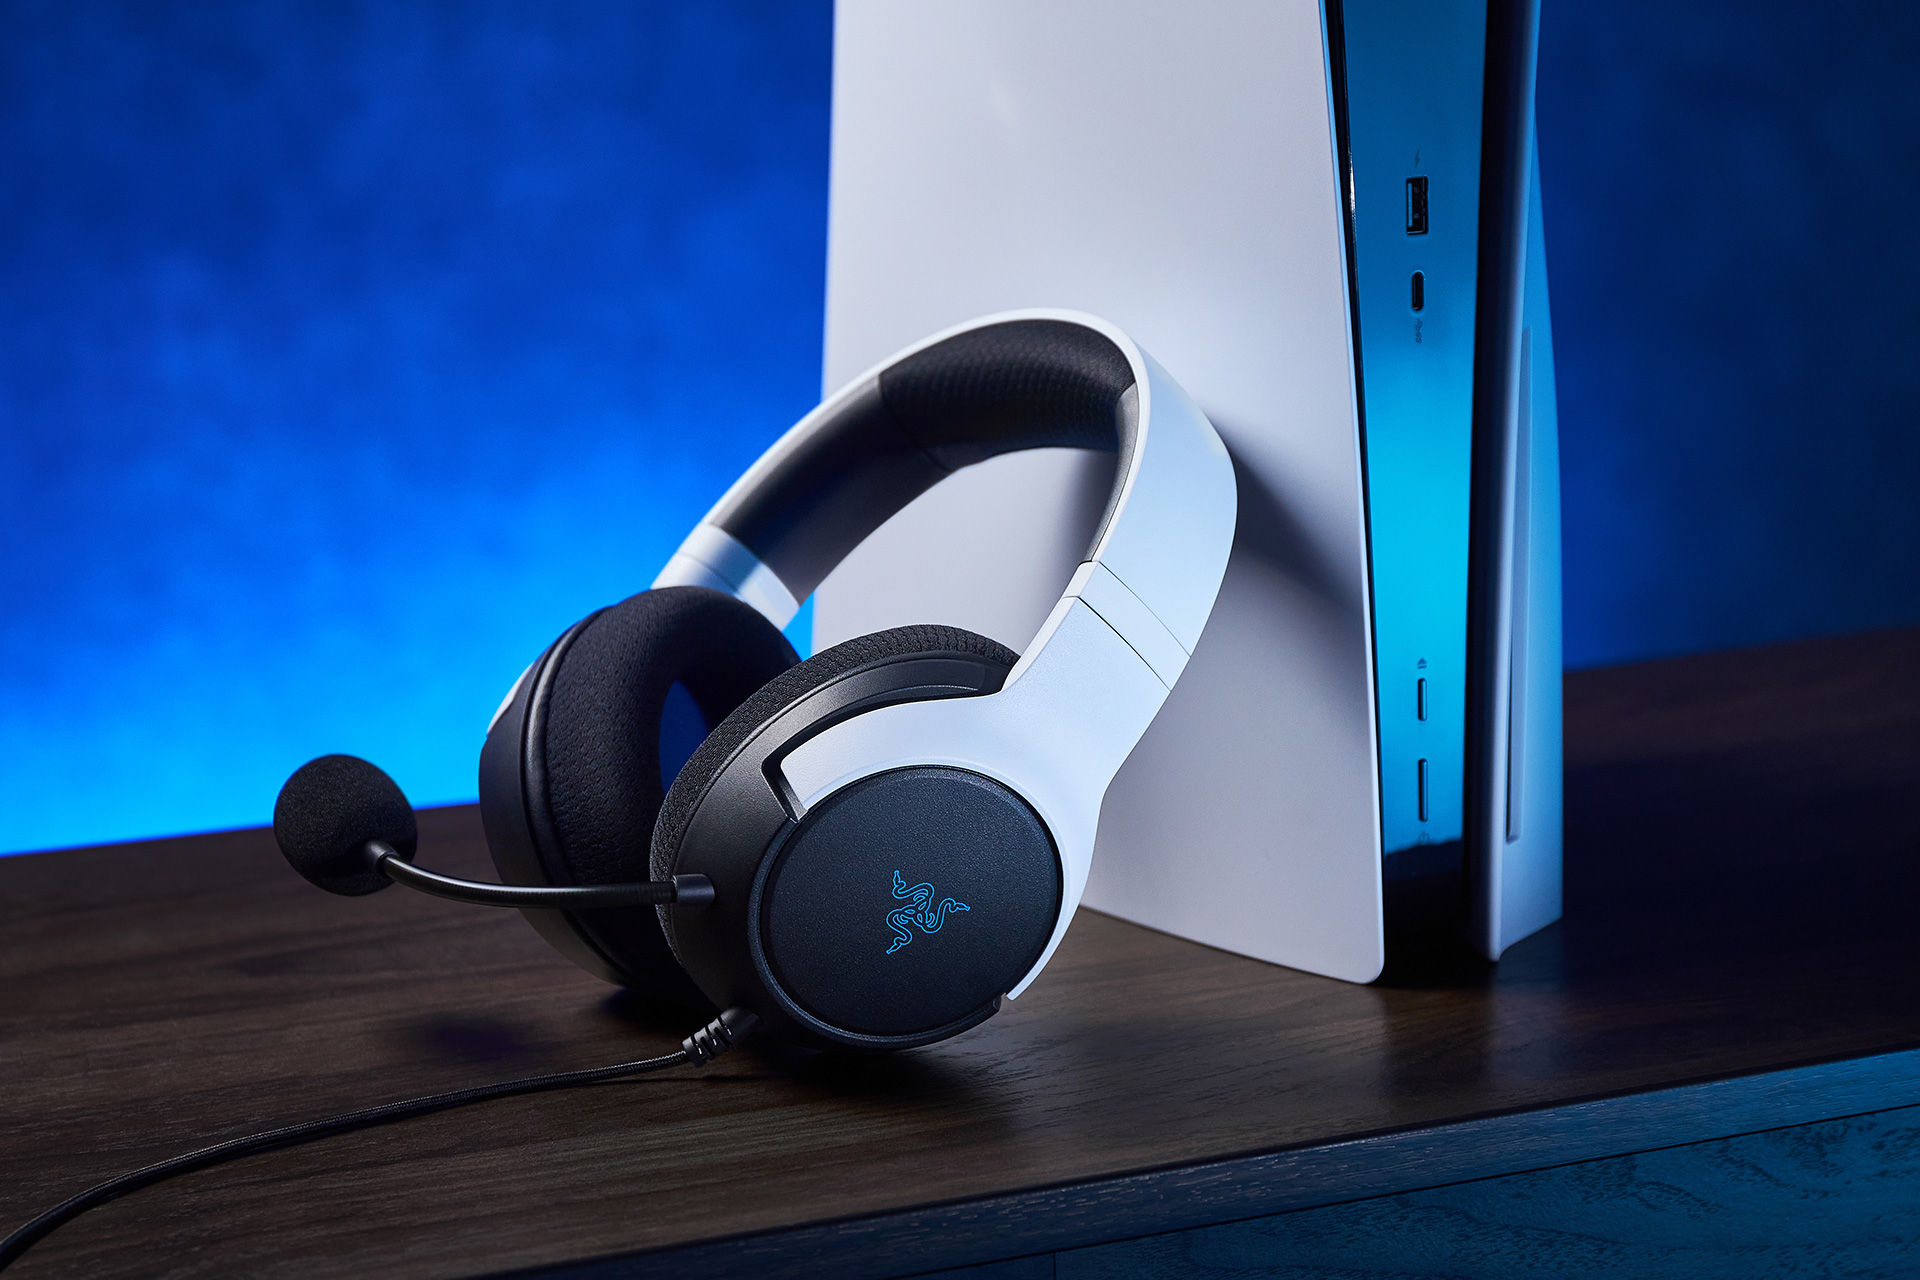 Razer's Kaira X is a lower-cost headset for console gamers